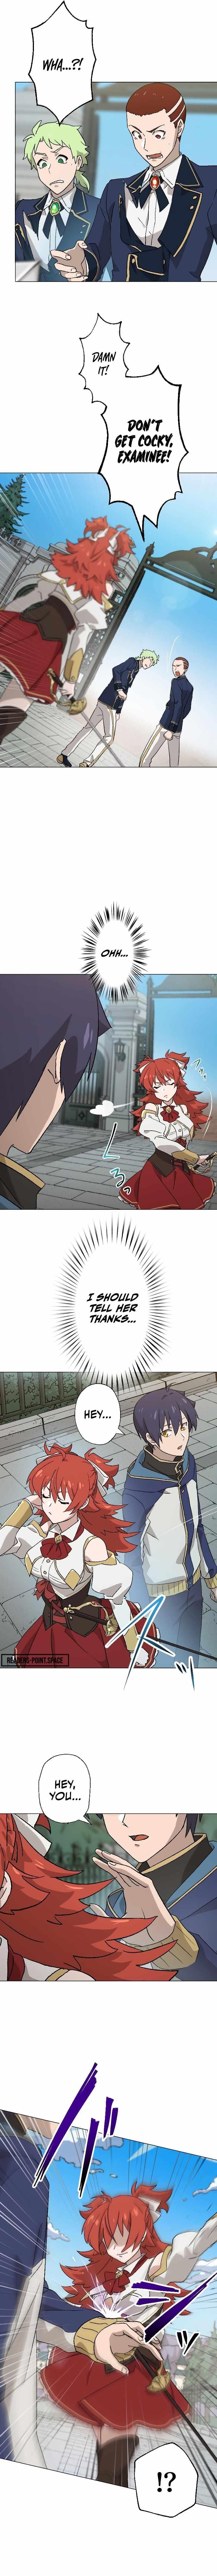 The Reincarnated Magician With Inferior Eyes ~The Oppressed Ex-hero Survives the Future World With Ease~ Chapter 9 - Page 7